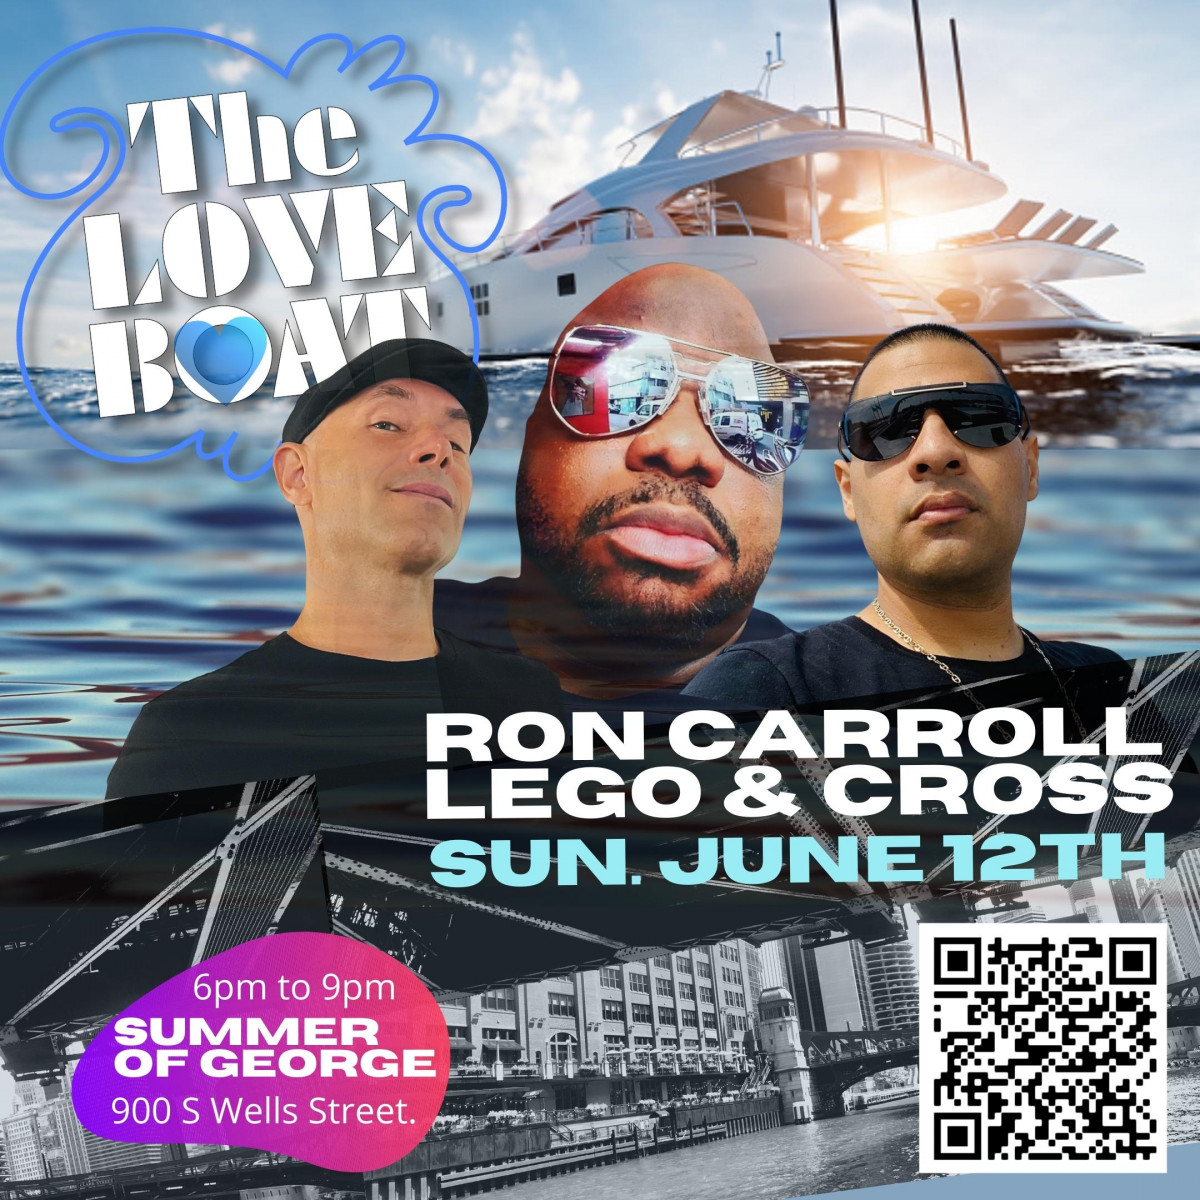 The Love Boat Booze Cruise FT: Ron Carroll & Friends